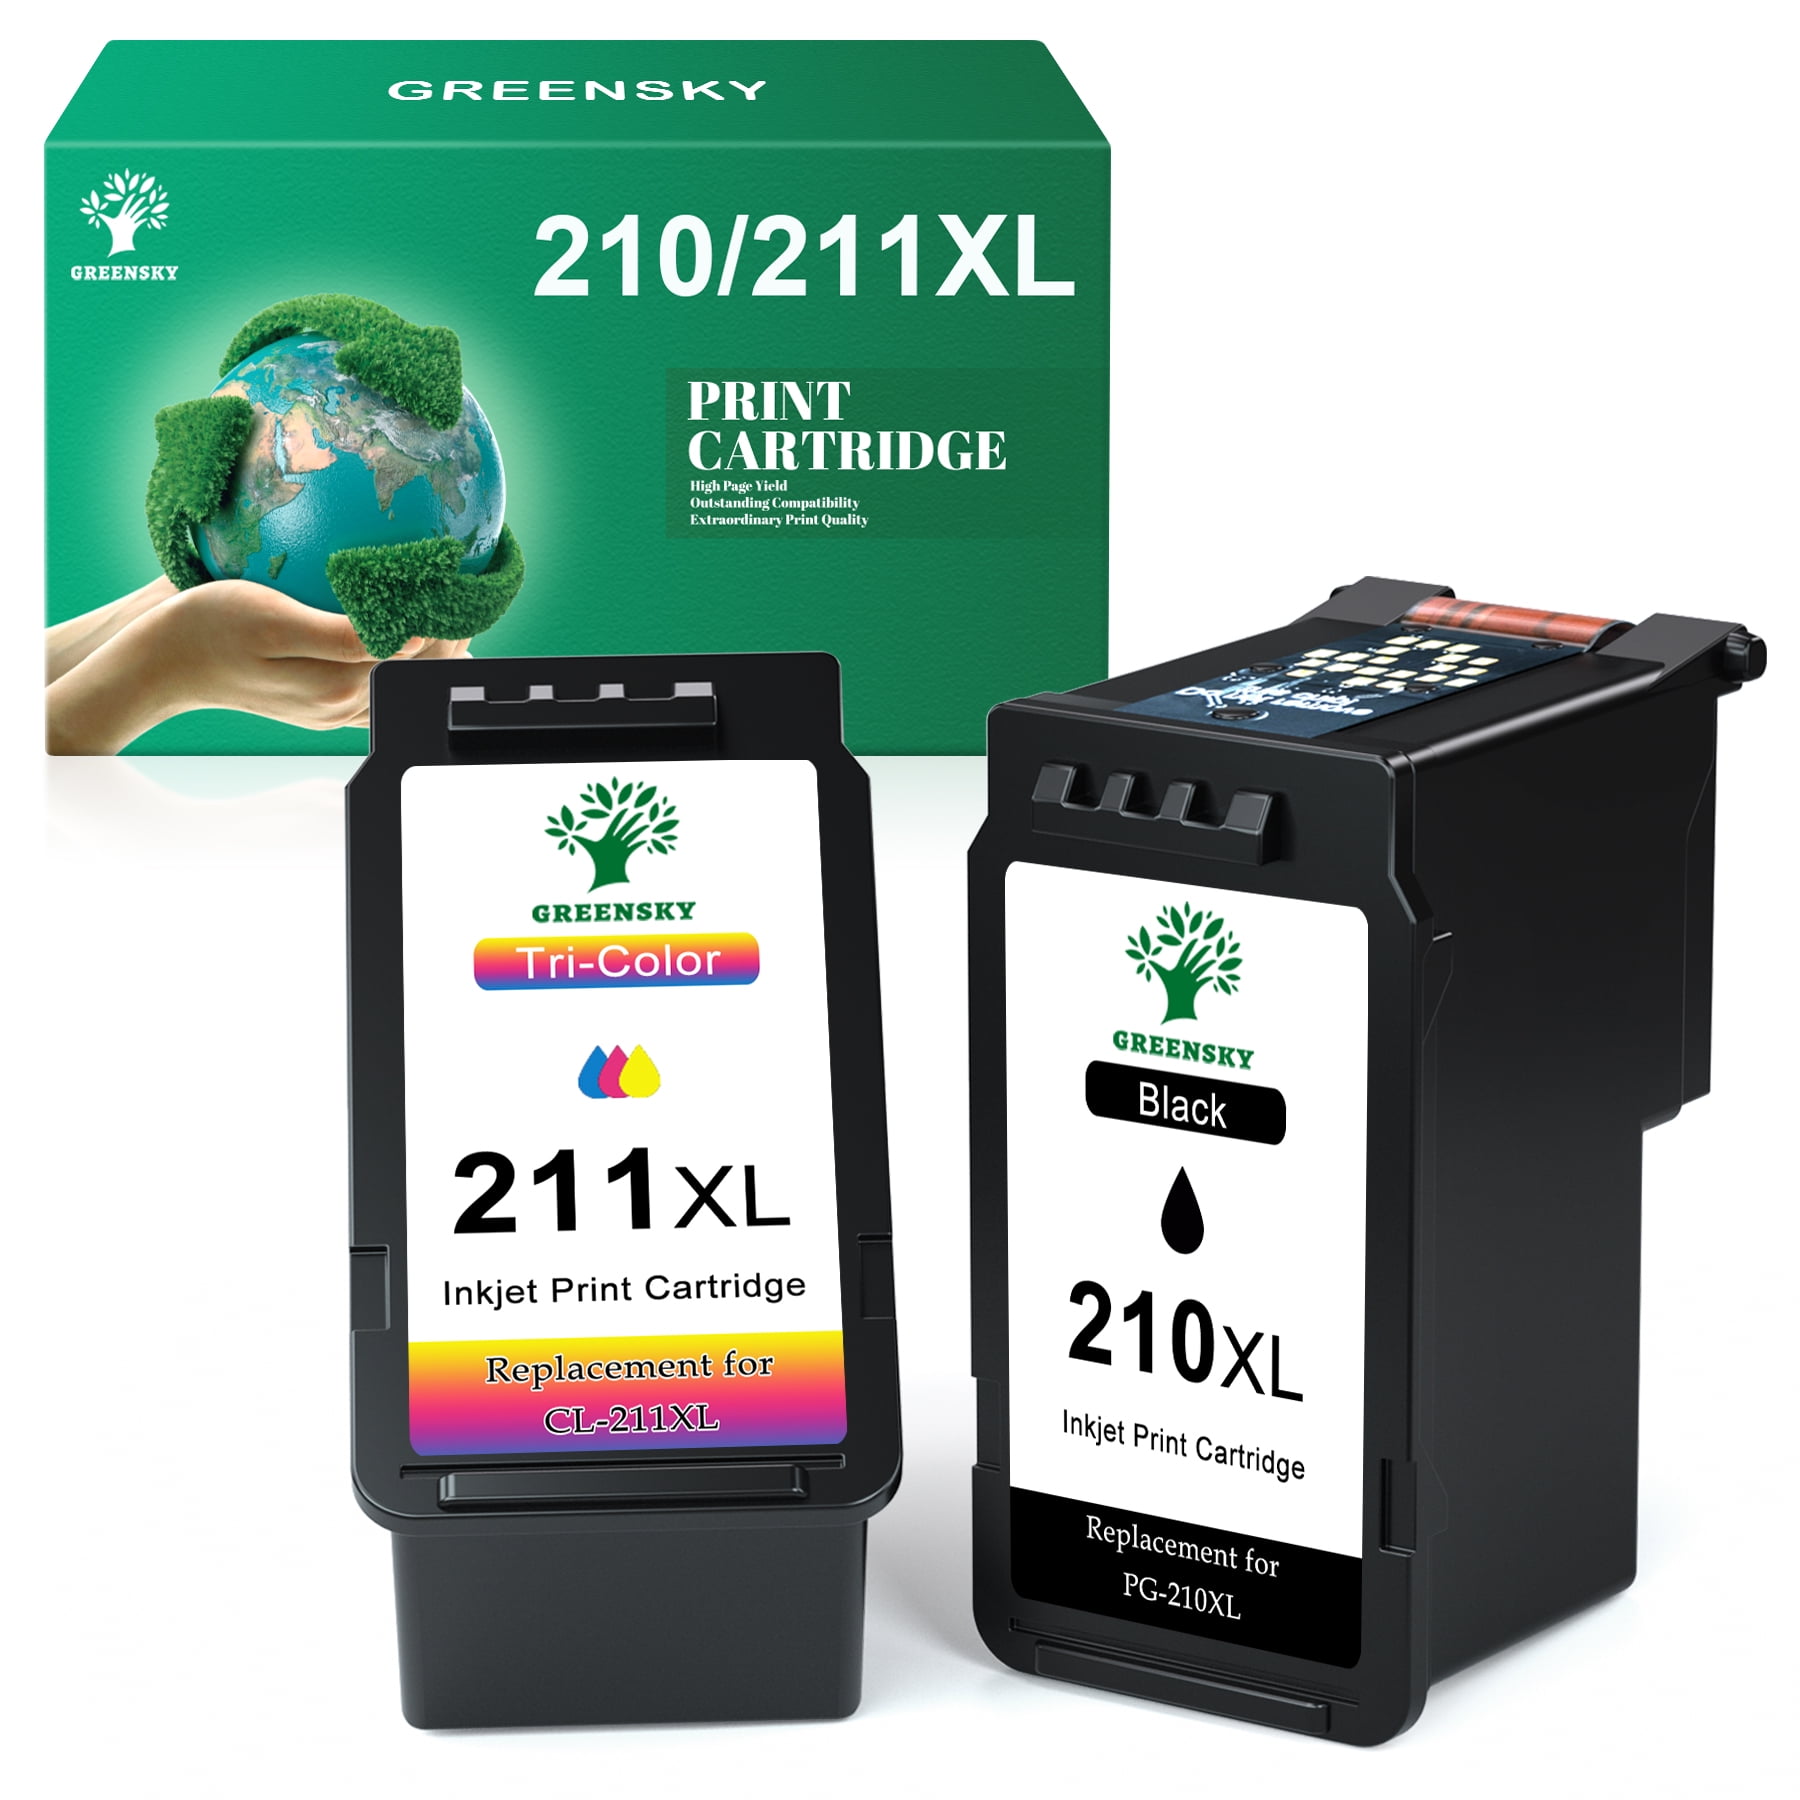 Greensky 210XL 211XL Ink Cartridges Canon Ink 210 and 211 Pack for Canon PIXMA MP490 MP480 MP280 MP250 MP240 MX410 MX340(2-Pack) - Walmart.com